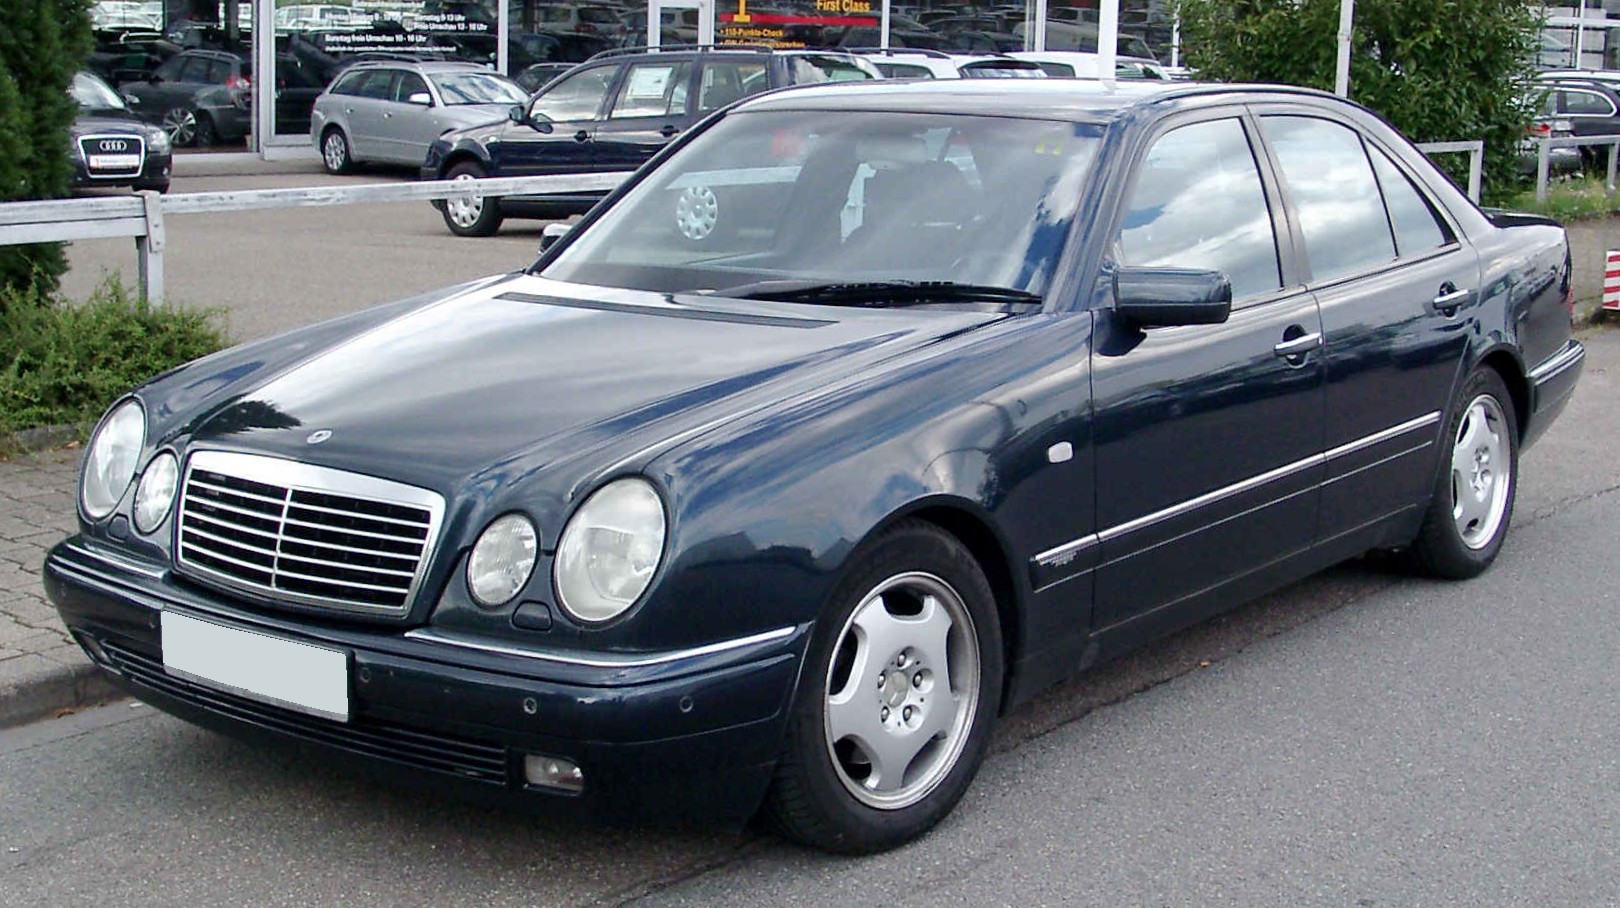 http://upload.wikimedia.org/wikipedia/commons/d/d7/Mercedes-Benz_W210_front_20080809.jpg